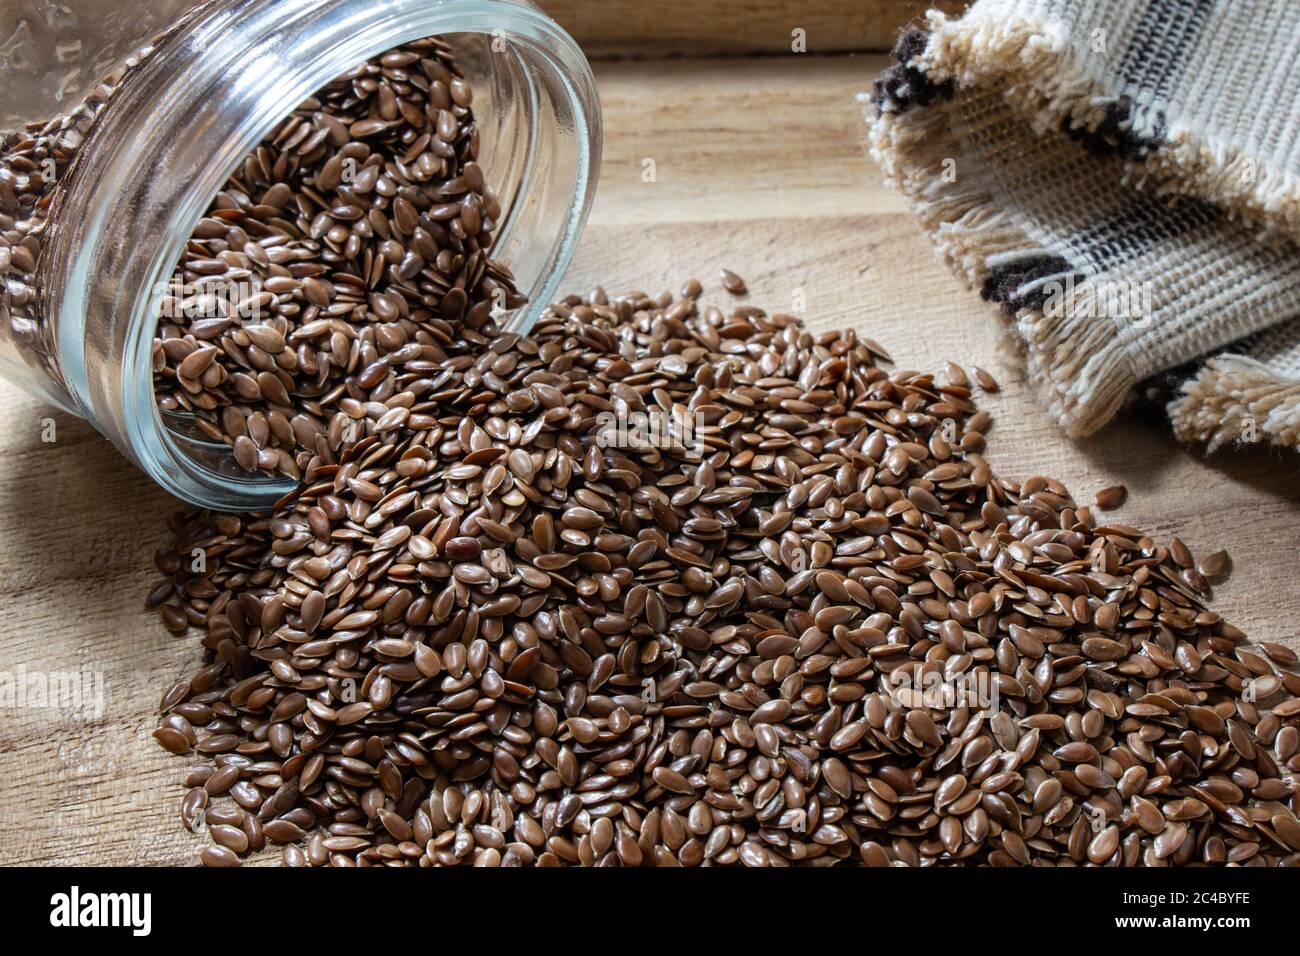 Flax seed falling from glass jar on rustic table. Flaxseed is an organic and healthy grain packed with natural nutrients often used in a vegetarian di Stock Photo